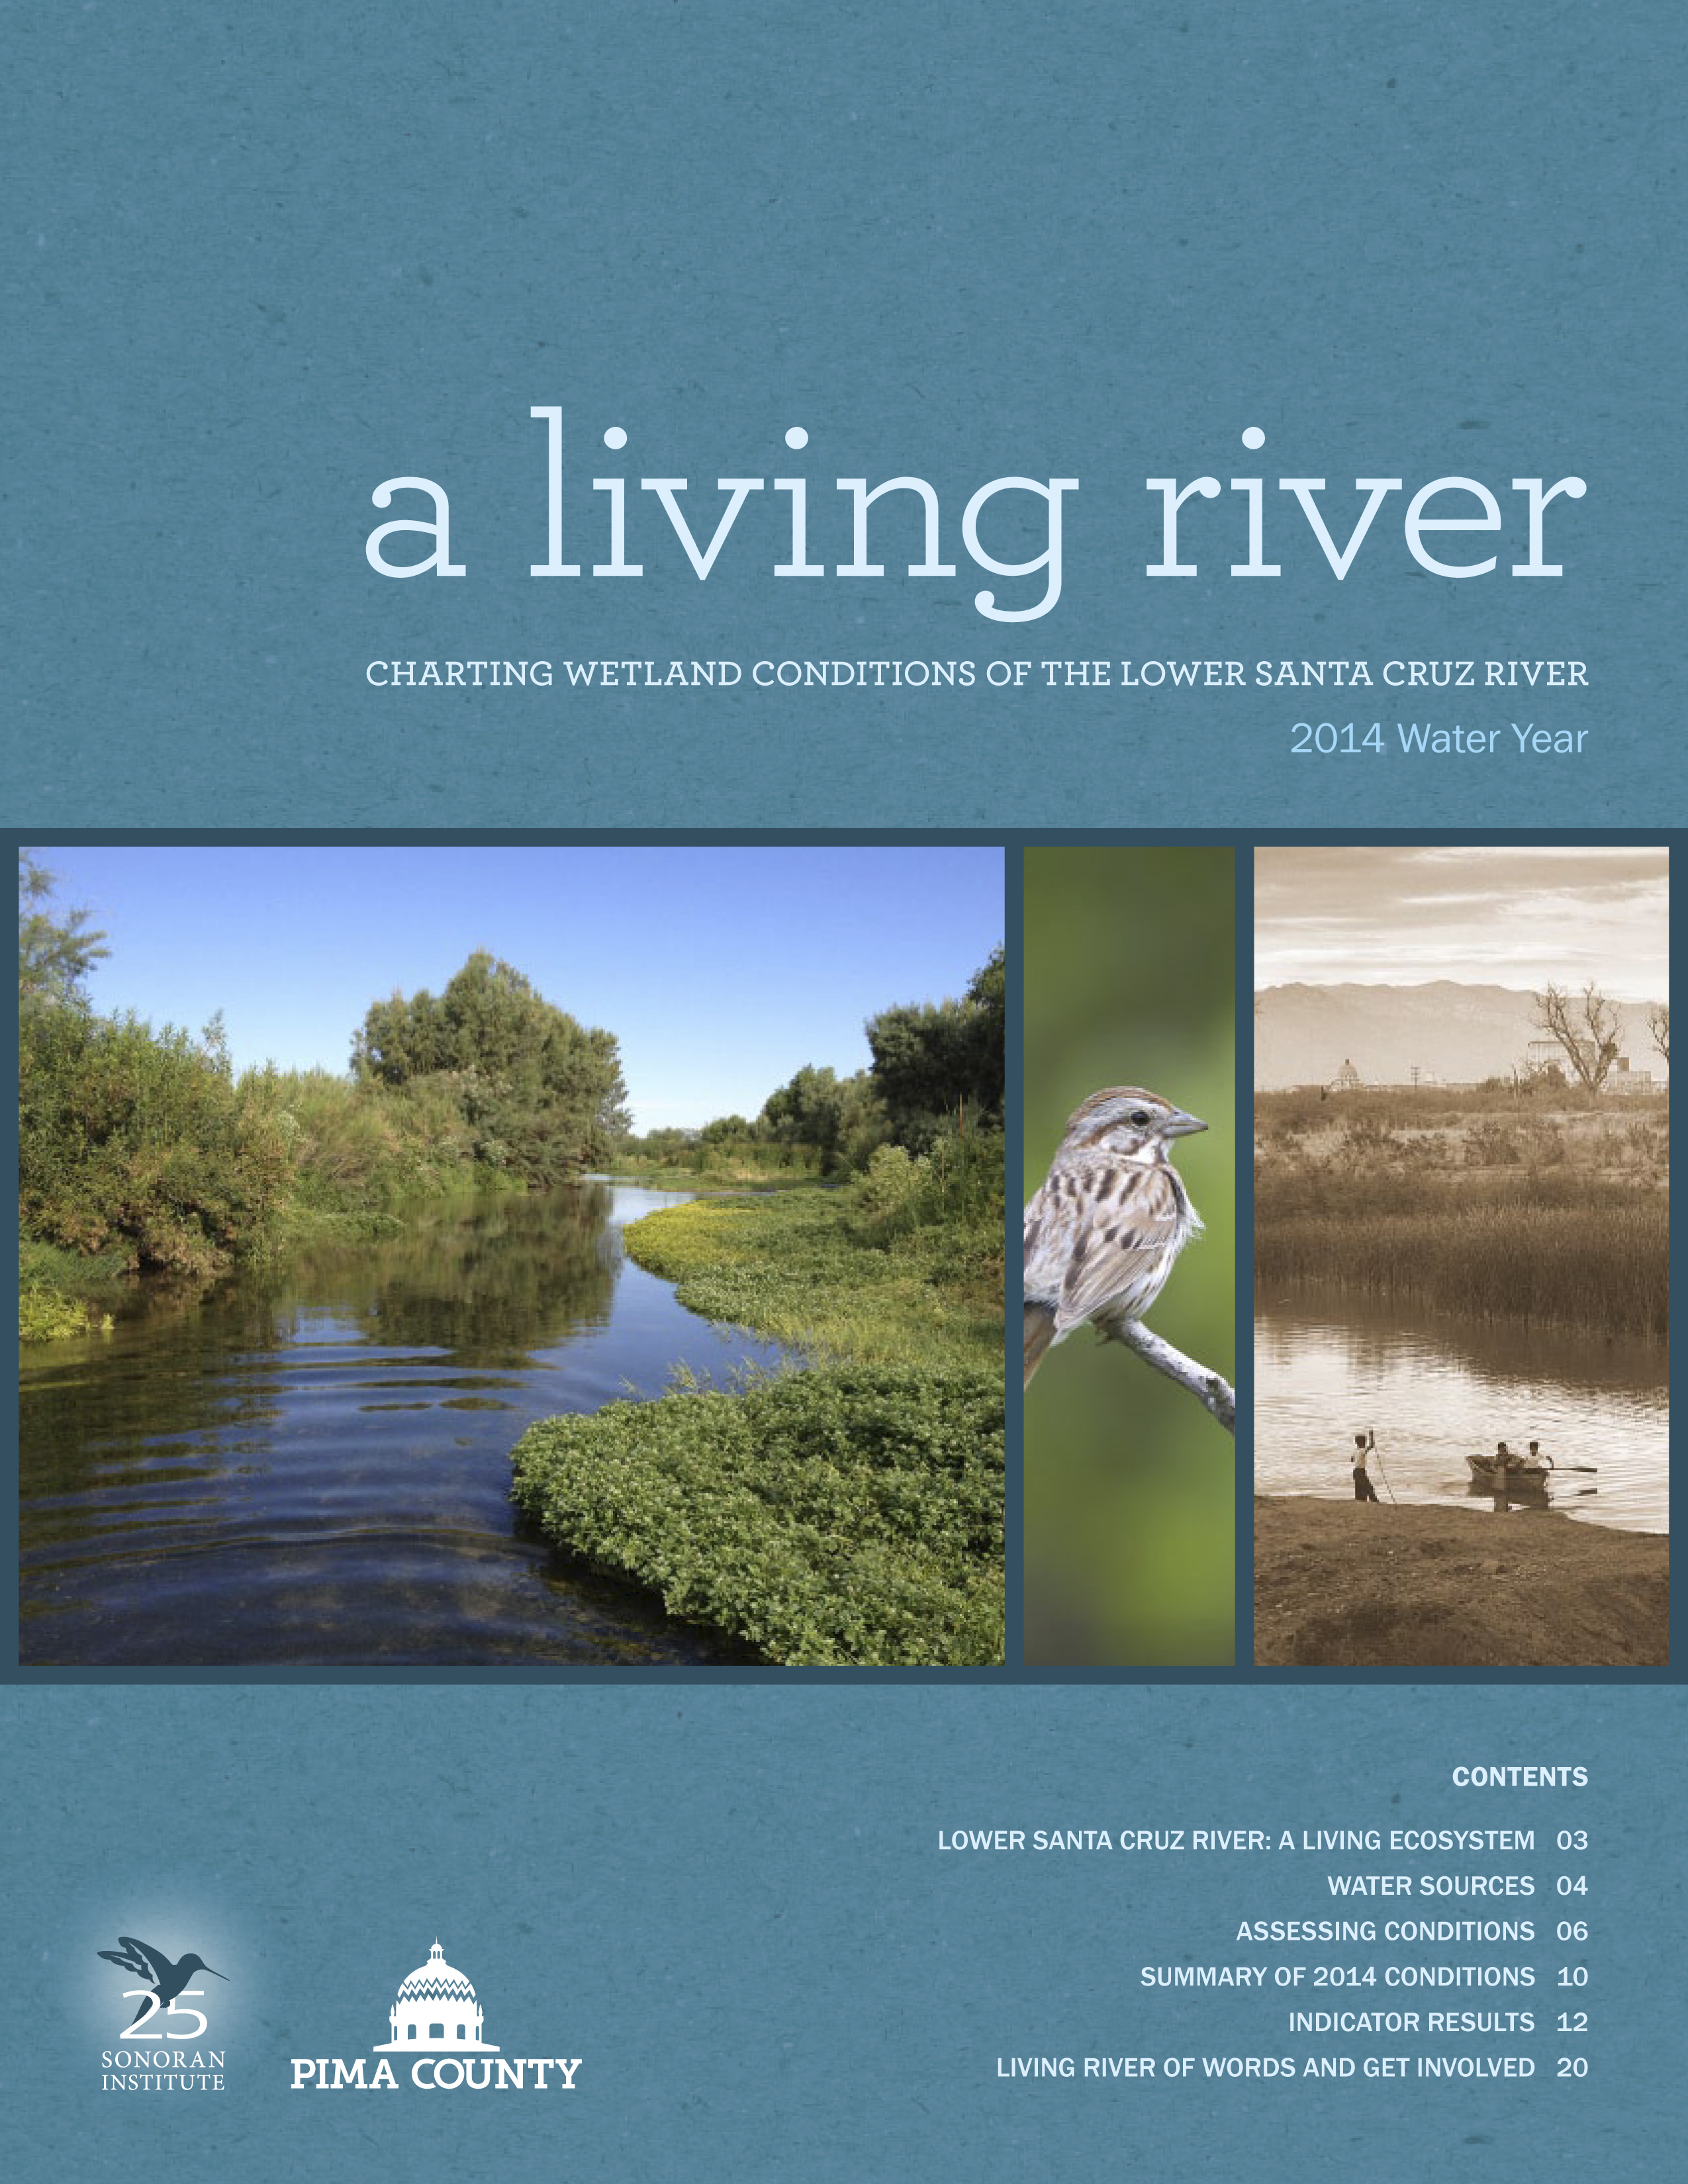 living-river-charting-wetland-conditions-of-the-lower-santa-cruz-river-2014-water-year-06052015-1